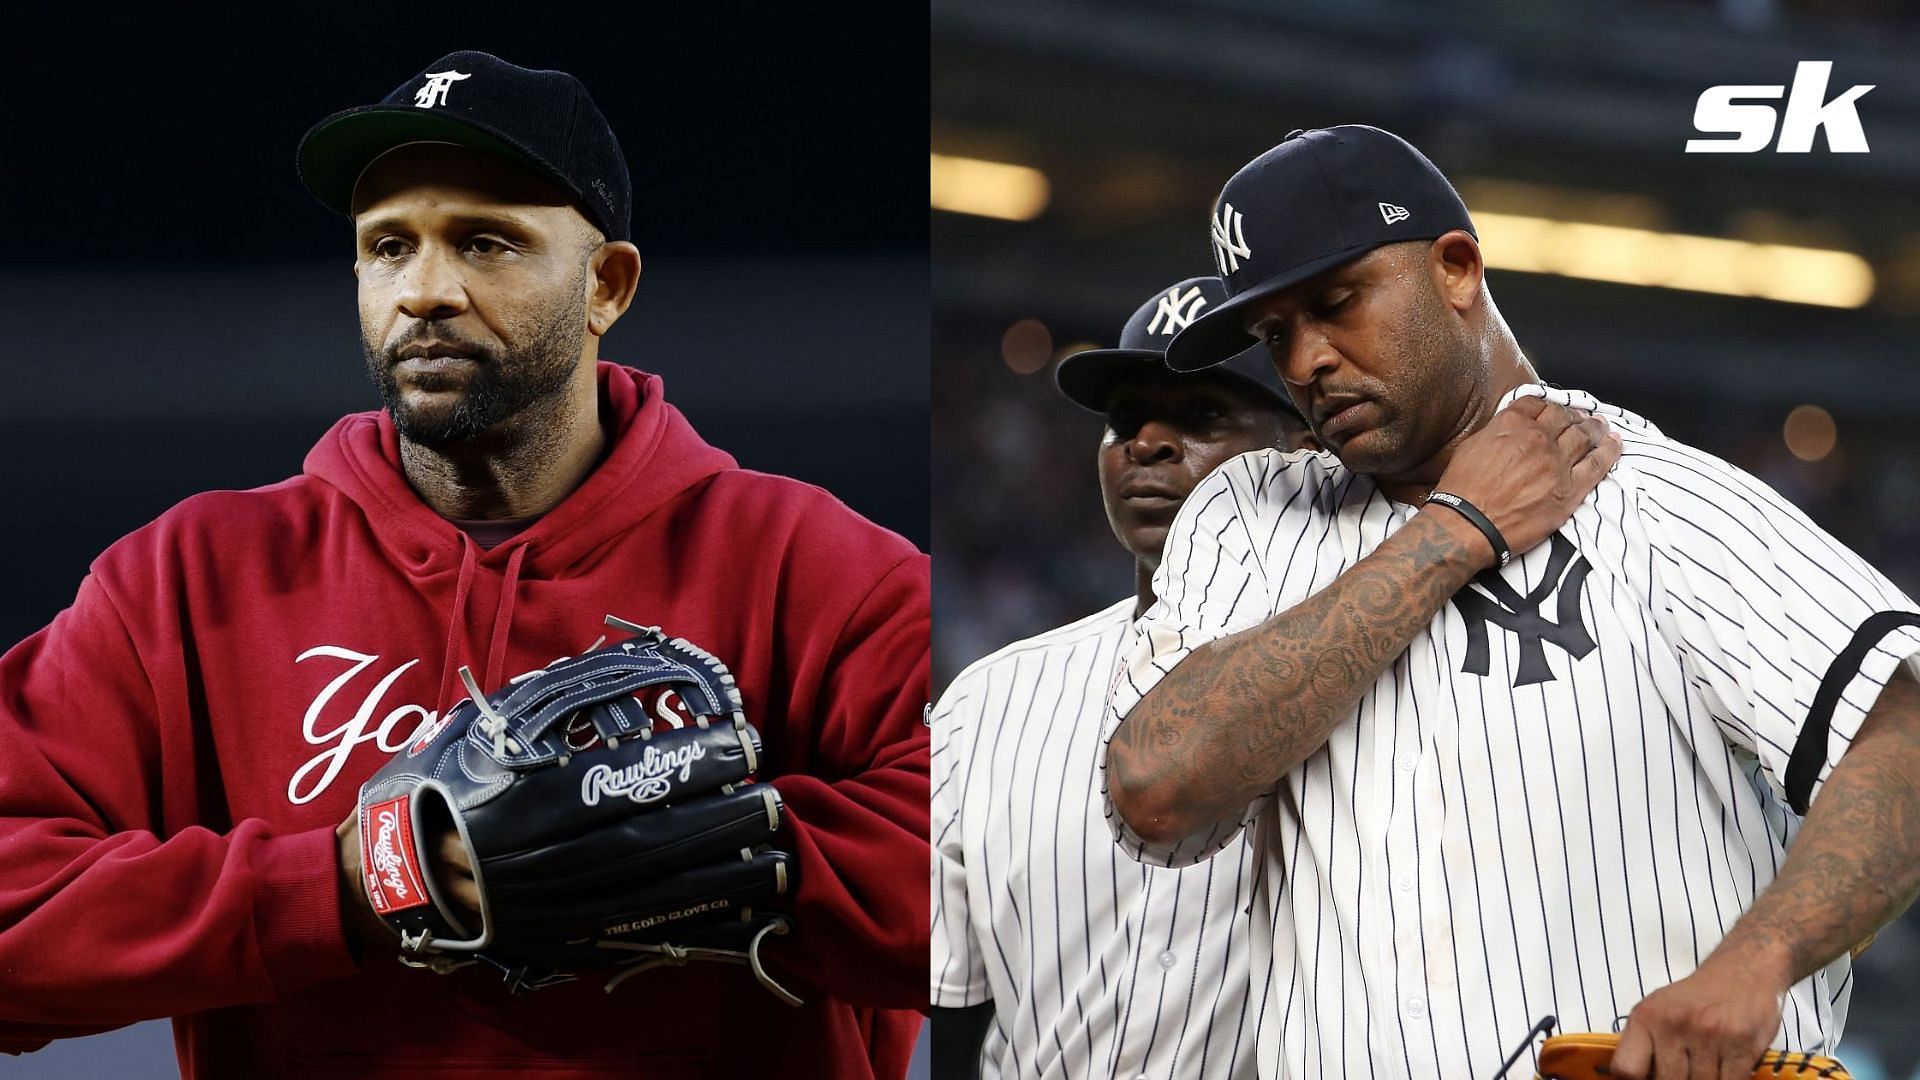 Google Bard believes that CC Sabathia will reach the Hall of Fame in his first year of eligibility